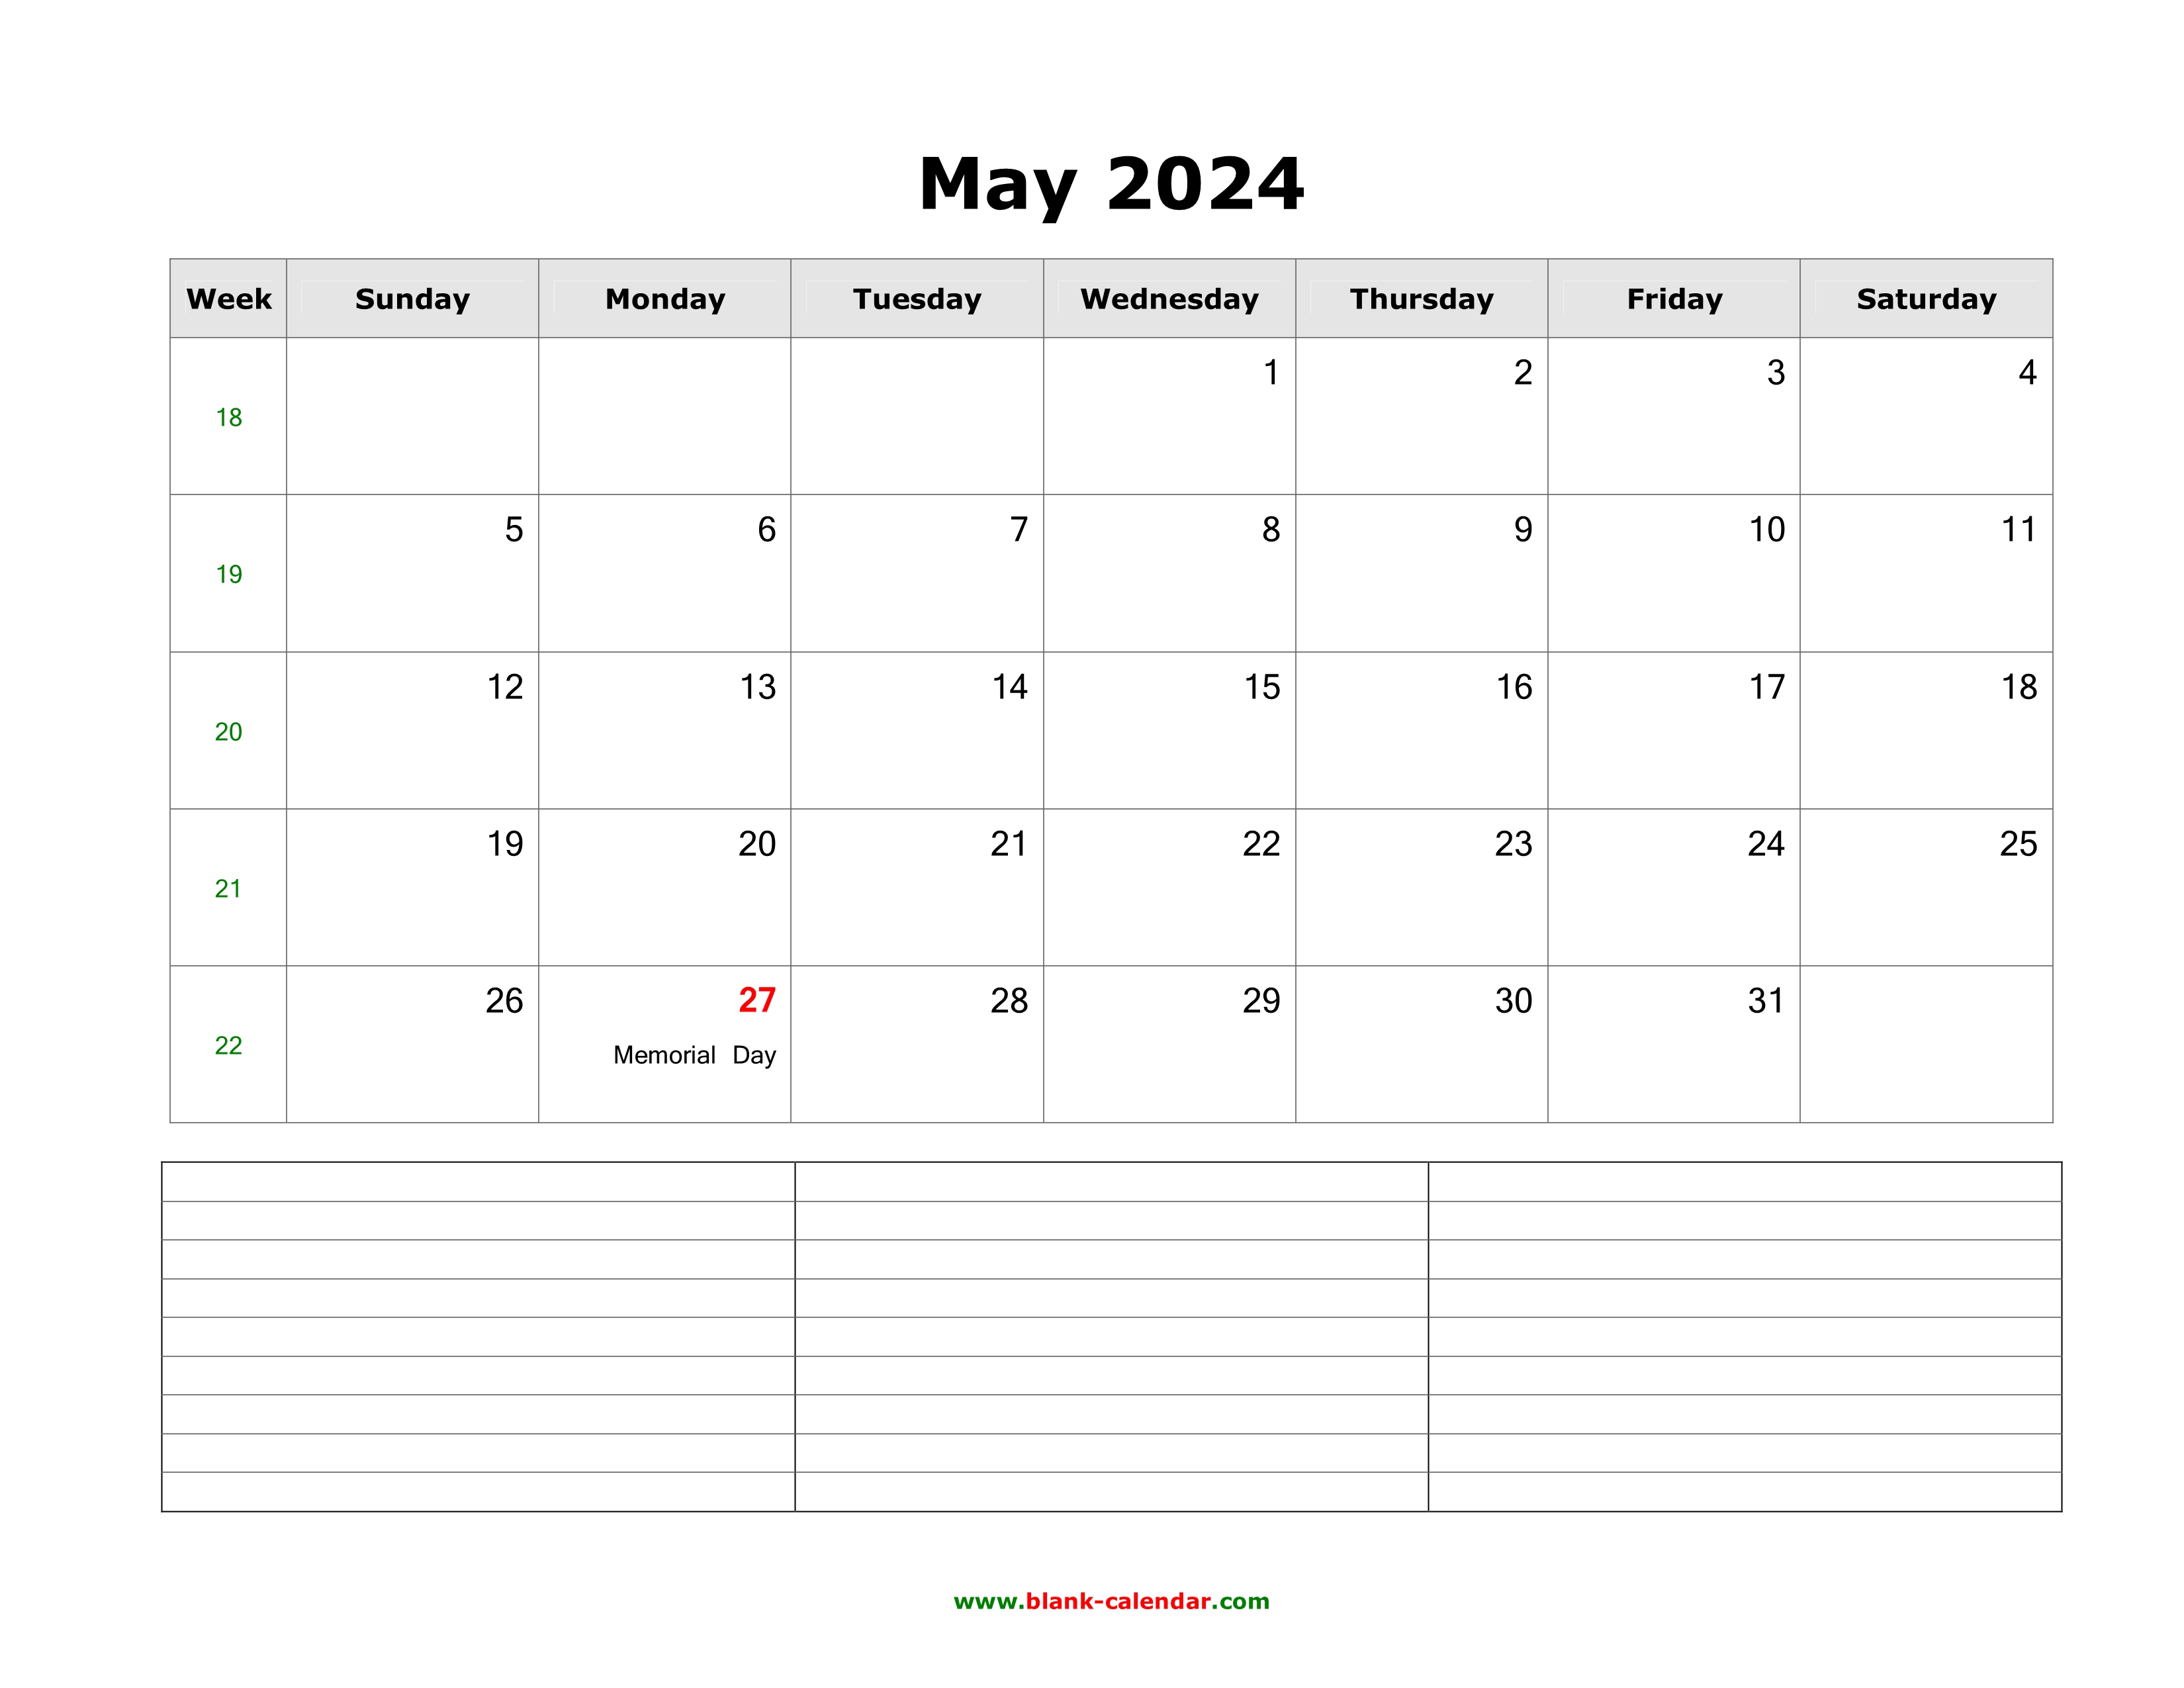 Download May 2024 Blank Calendar with Space for Notes (horizontal)